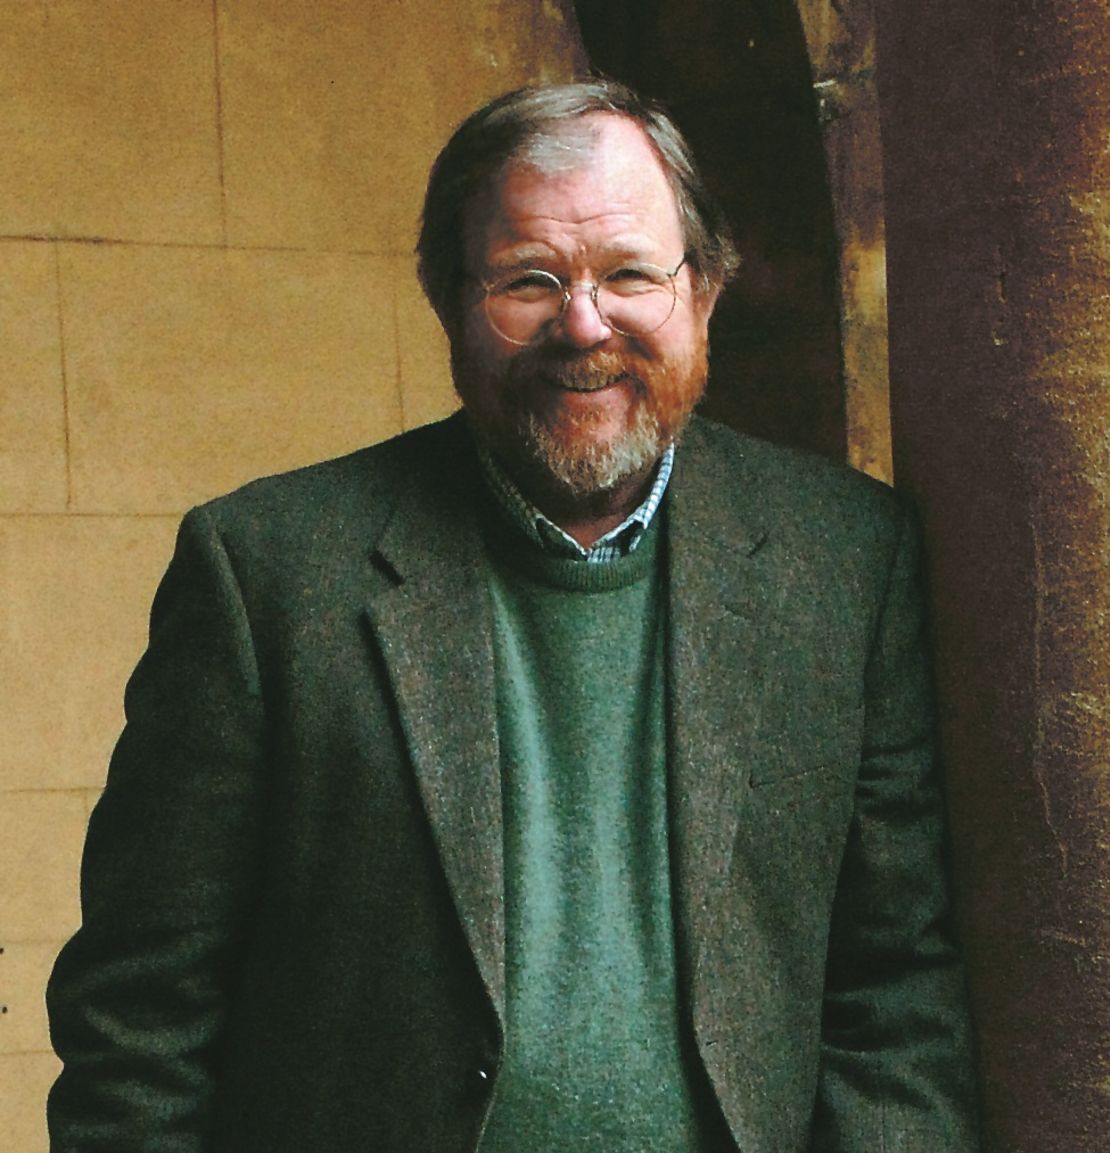 Bill Bryson's latest book, "One Summer," covers some tumultuous months in 1927.